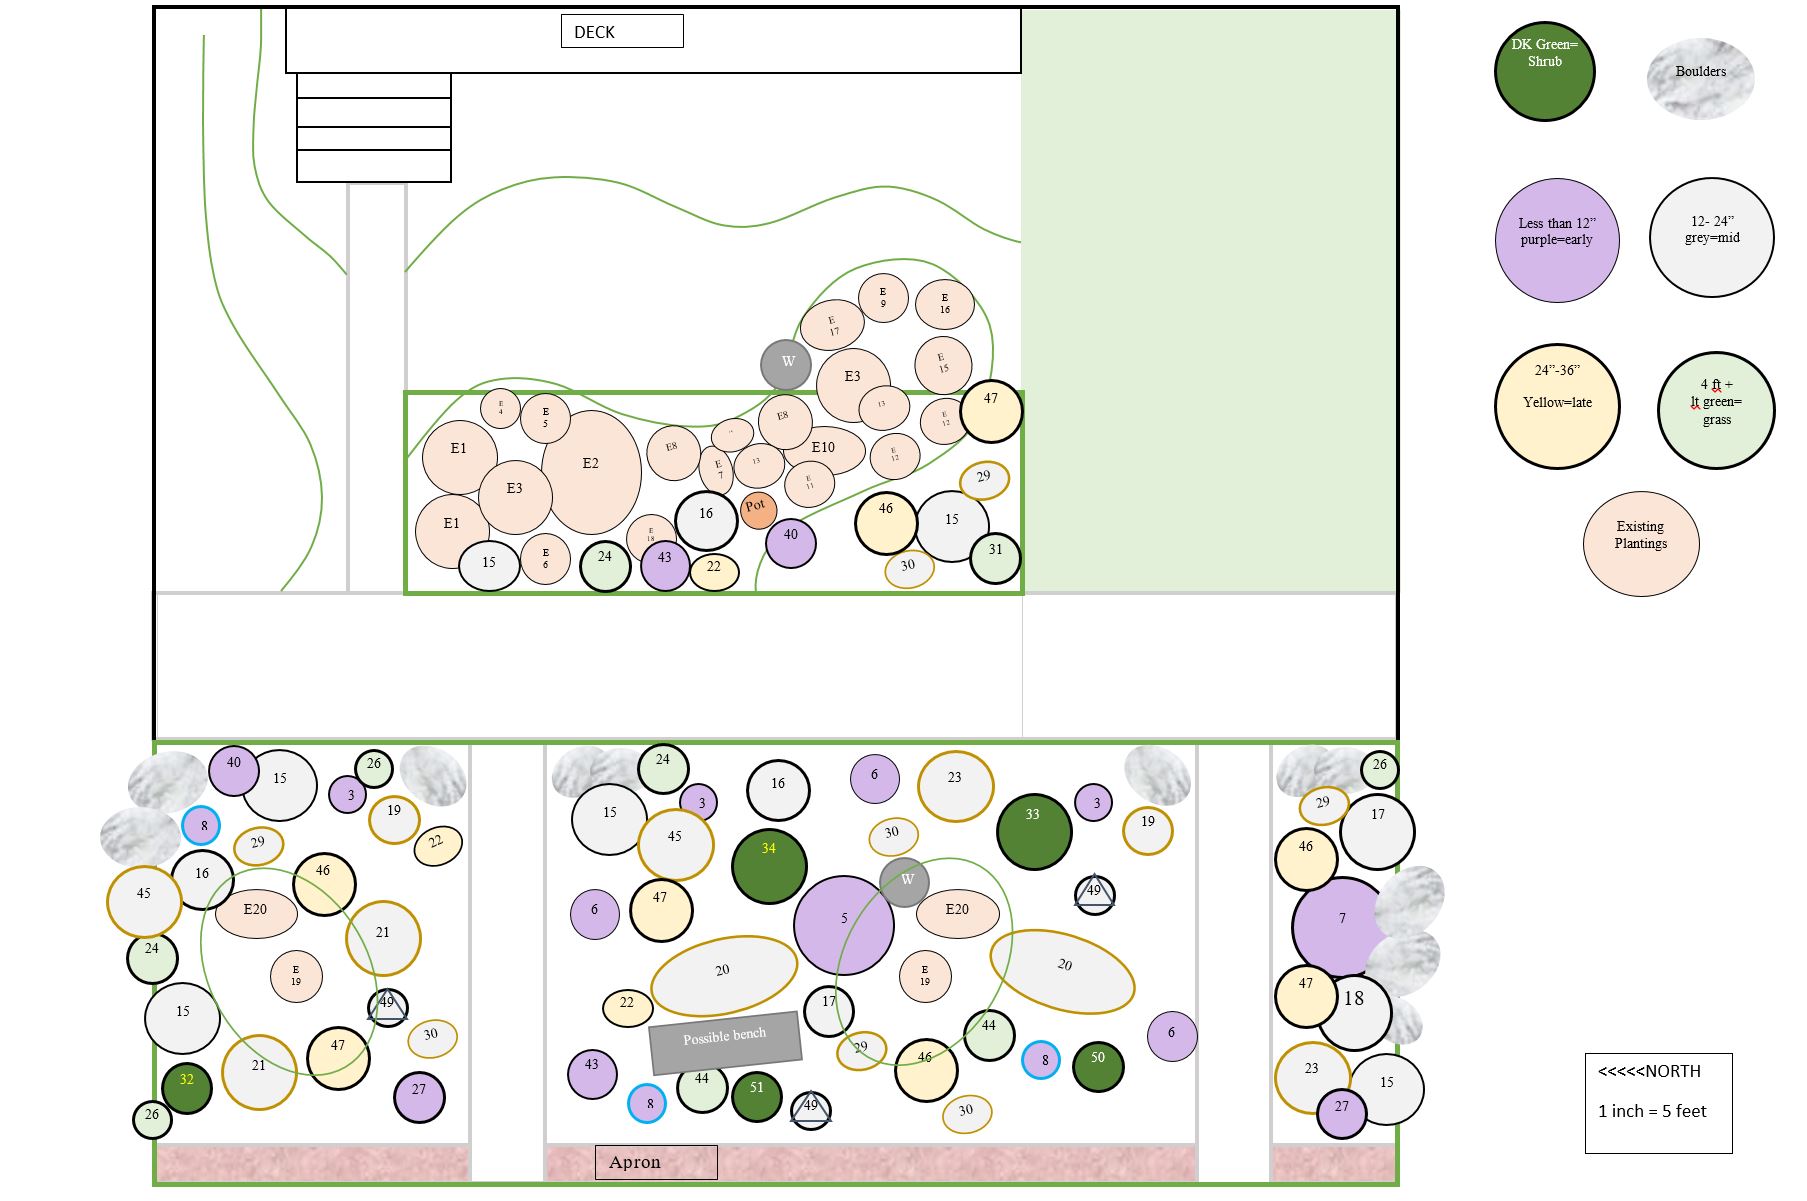 The design plan for the new Keeler Gardens Pollinator Habitat shows both existing and proposed plantings. Existing are label by number with “E” to denote they are already part of the space, grouped mostly at the top of the design (east side) and will be incorporated into the habitat design. New plantings are drawn as circles, color coded by season, purple for early bloom, grey for mid-season bloom, and yellow for late blooms. Greens denote grasses (light) or shrubs (dark). Outlines indicate the height of full grown plants from thin (12” minimum height) to thick (4-6 ft maximum height). New plantings are scattered throughout the design to fill the space. Also included in the design are proposed structures like boulders, benches, water features, and trellises.